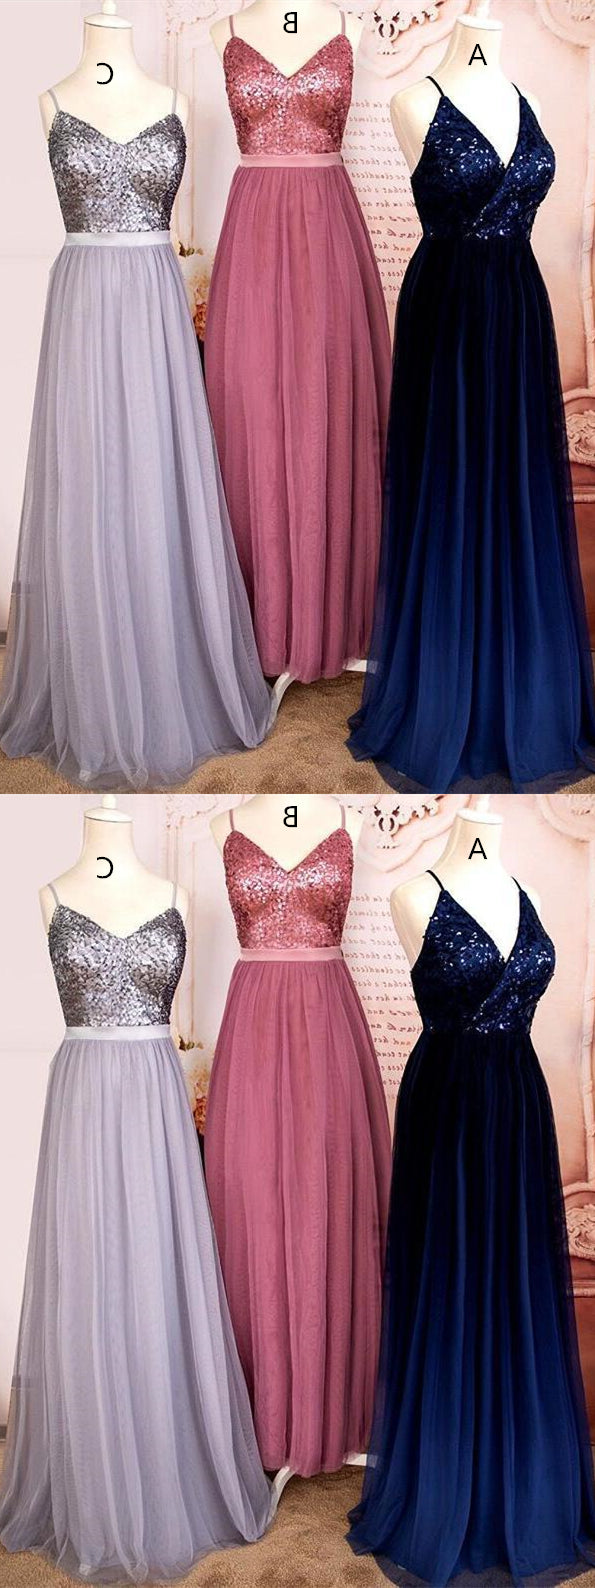 Spaghetti Long A-line Sequin Top Prom/Bridesmaid Dresses, Long Prom Dresses